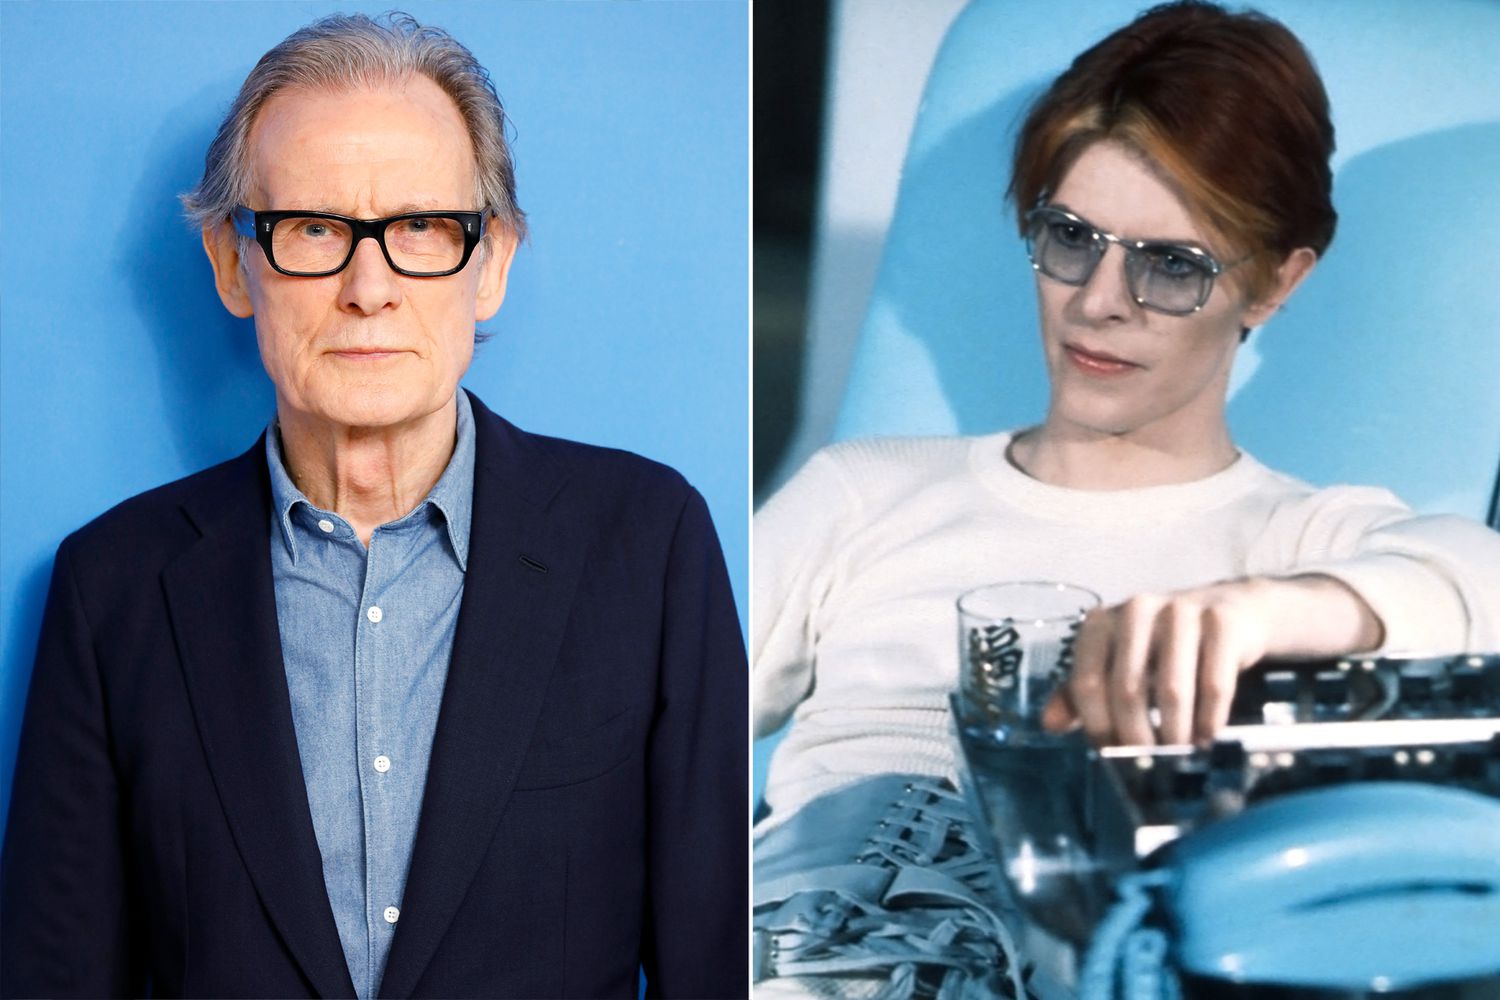 Bill Nighy, THE MAN WHO FELL TO EARTH